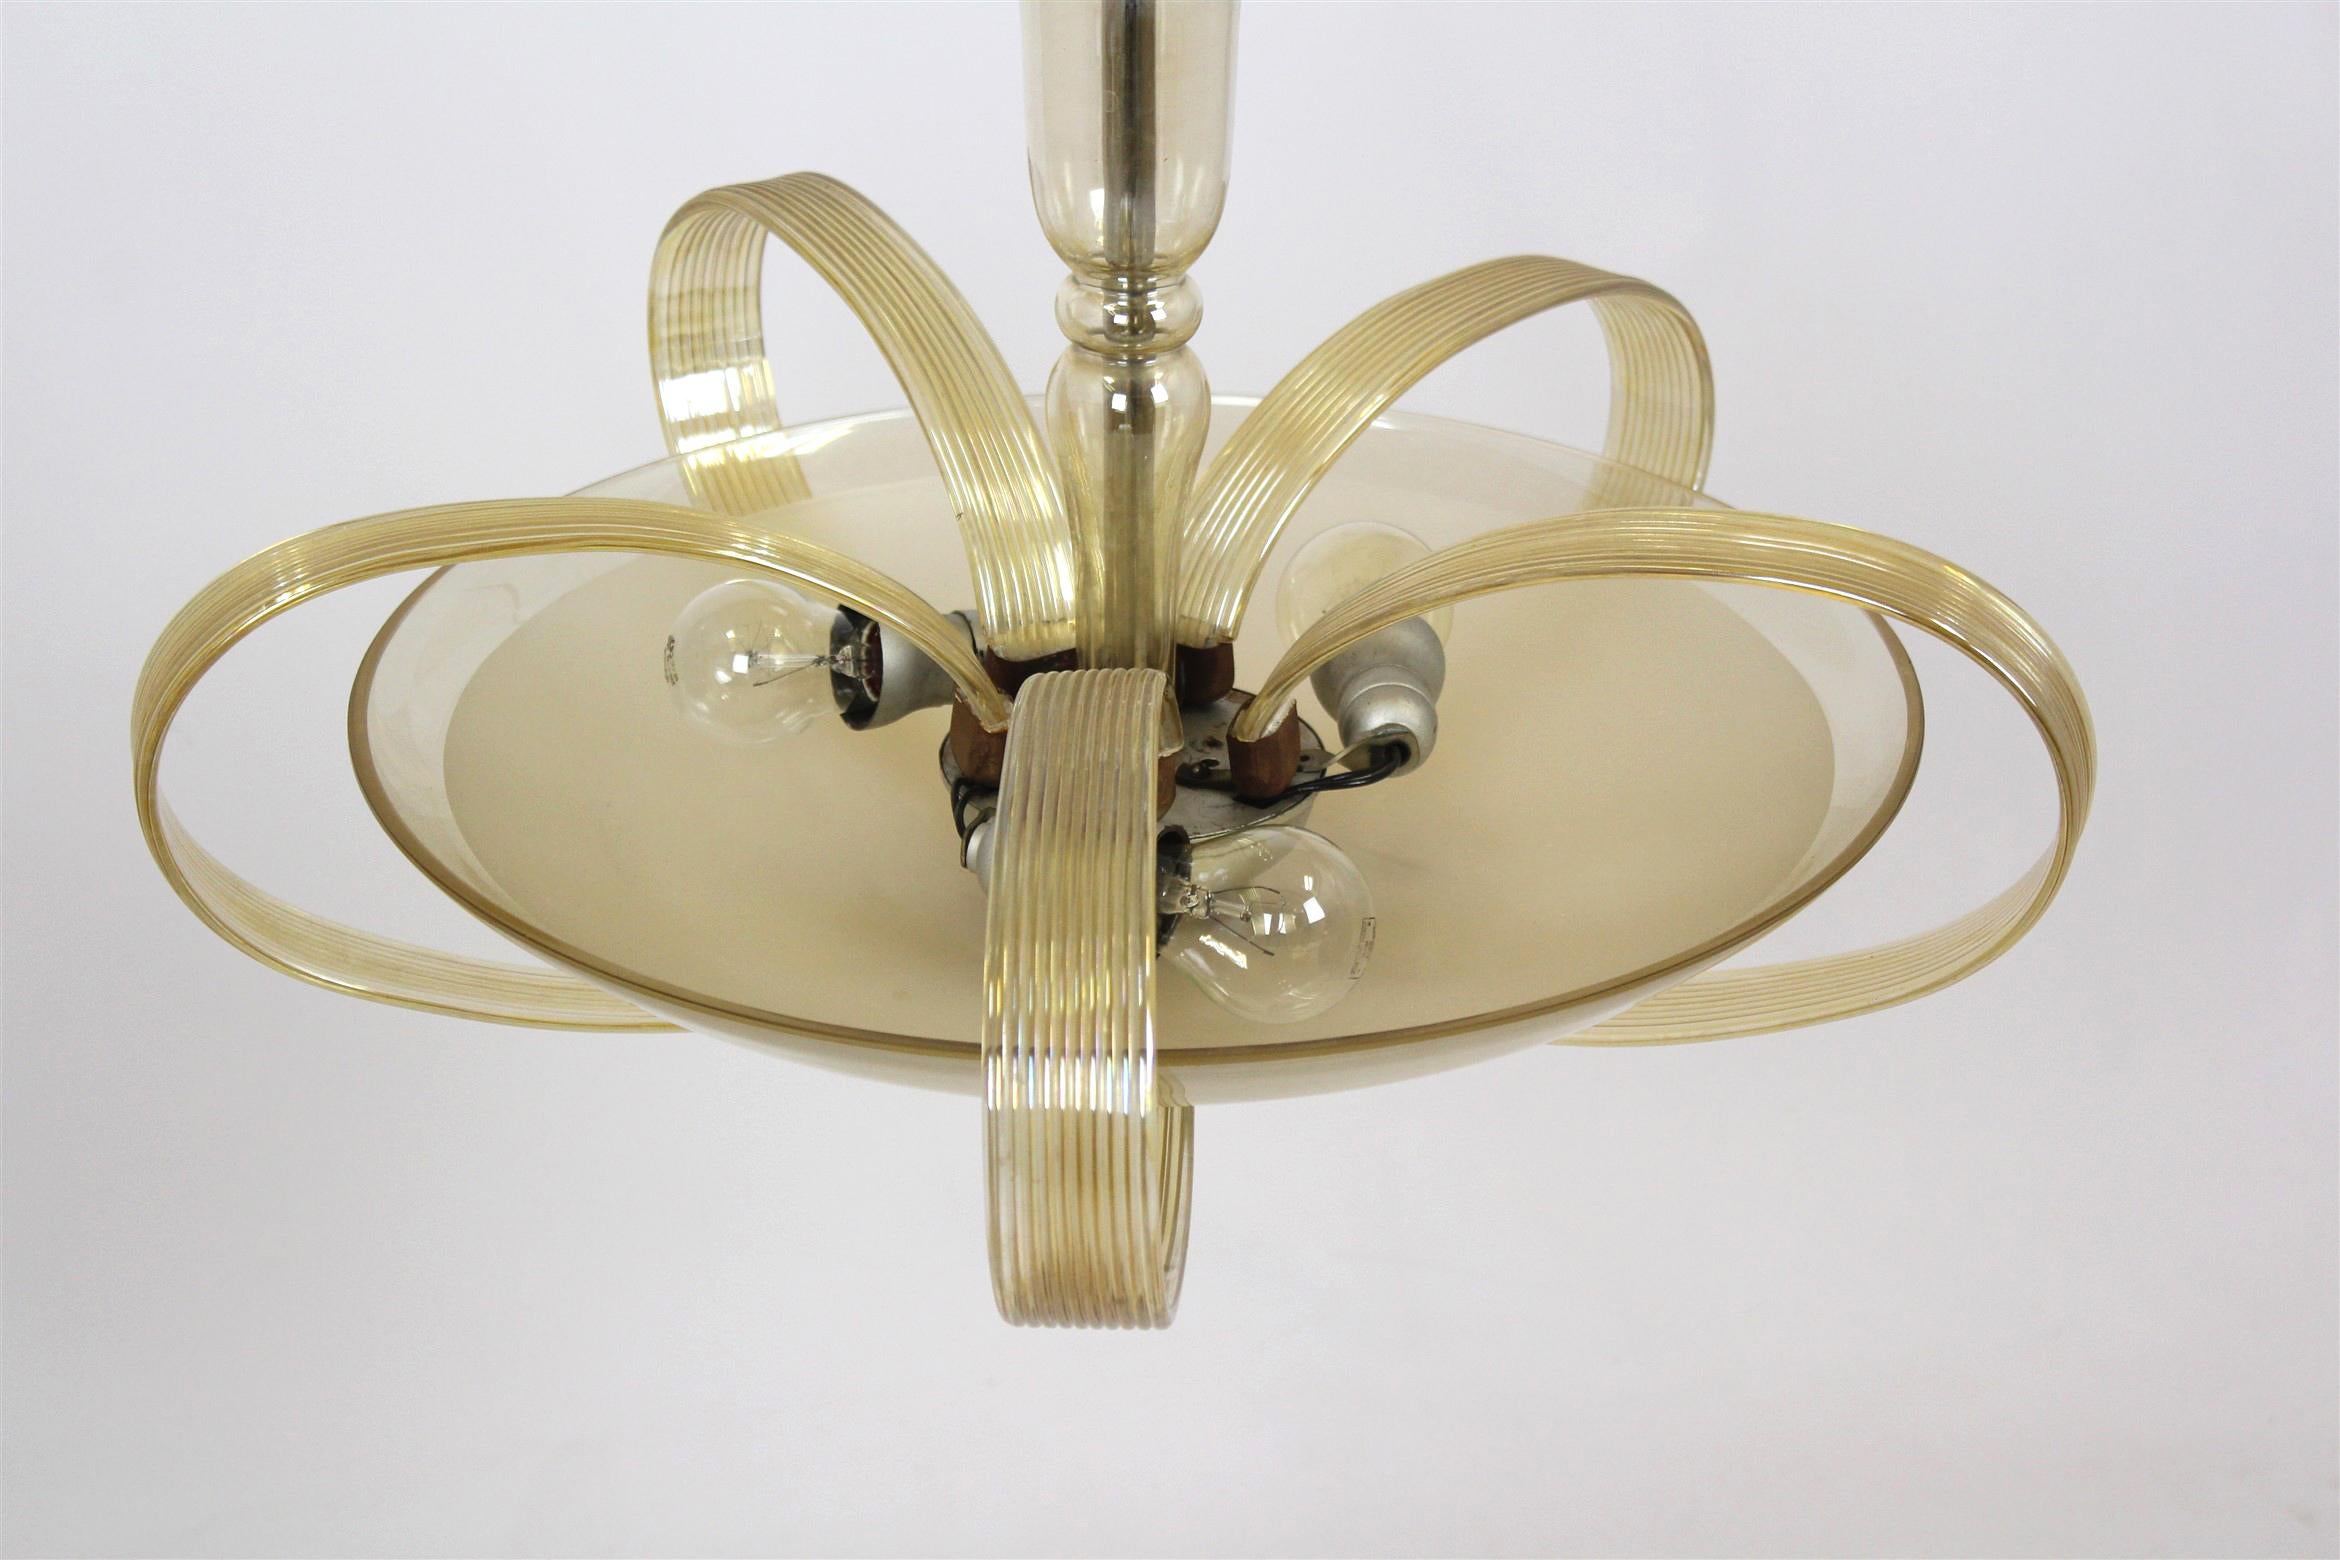 Tall Art Deco Curved Glass Chandelier from ESC Zukov, 1940s For Sale 1